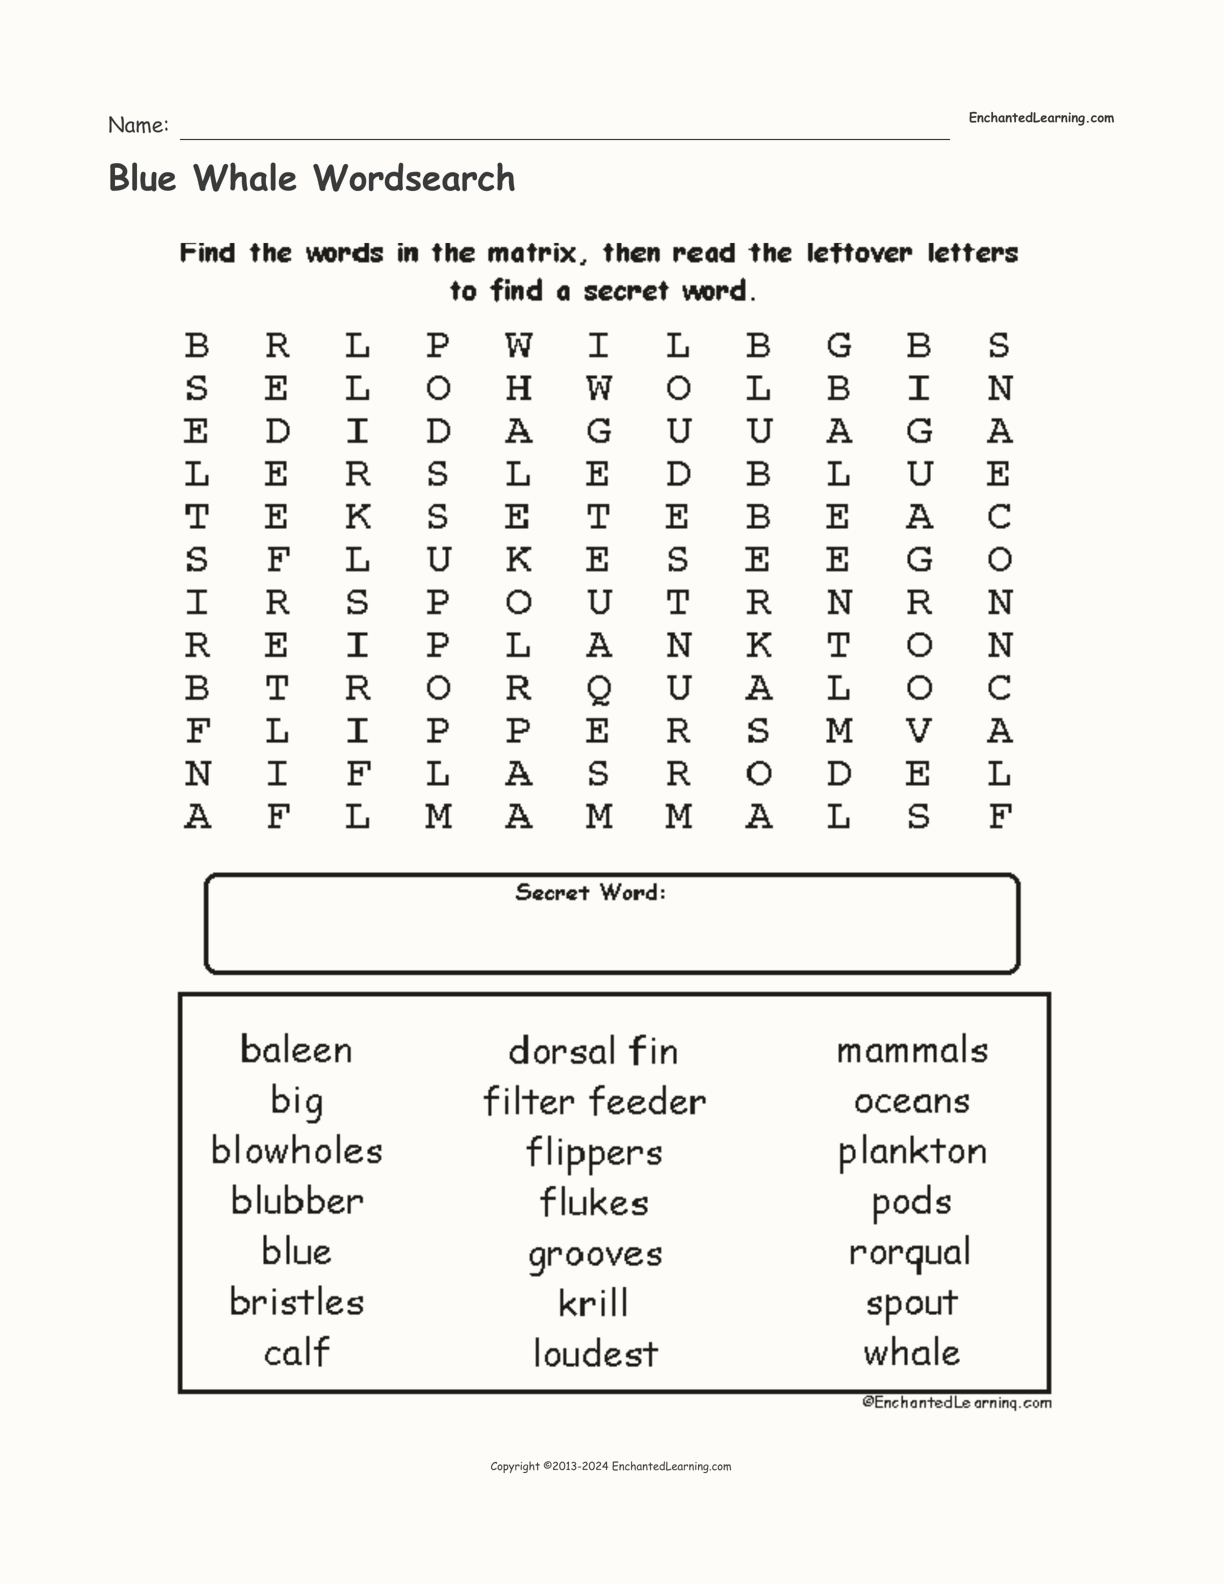 Blue Whale Wordsearch interactive worksheet page 1